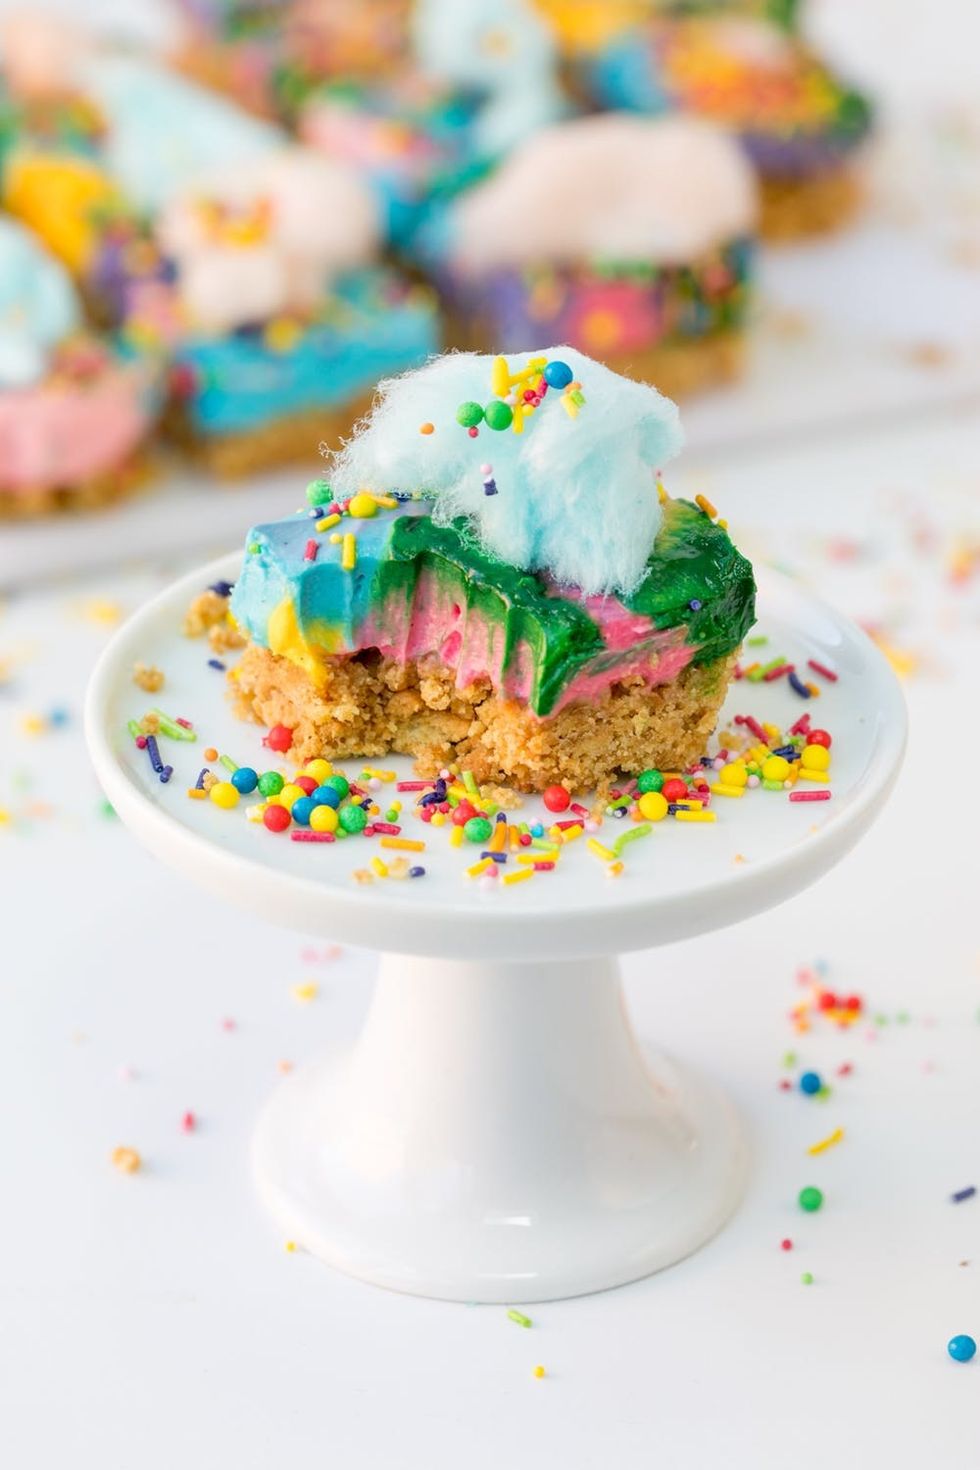 Check out our Lisa Frank Inspired Rainbow Cheesecake Recipe!